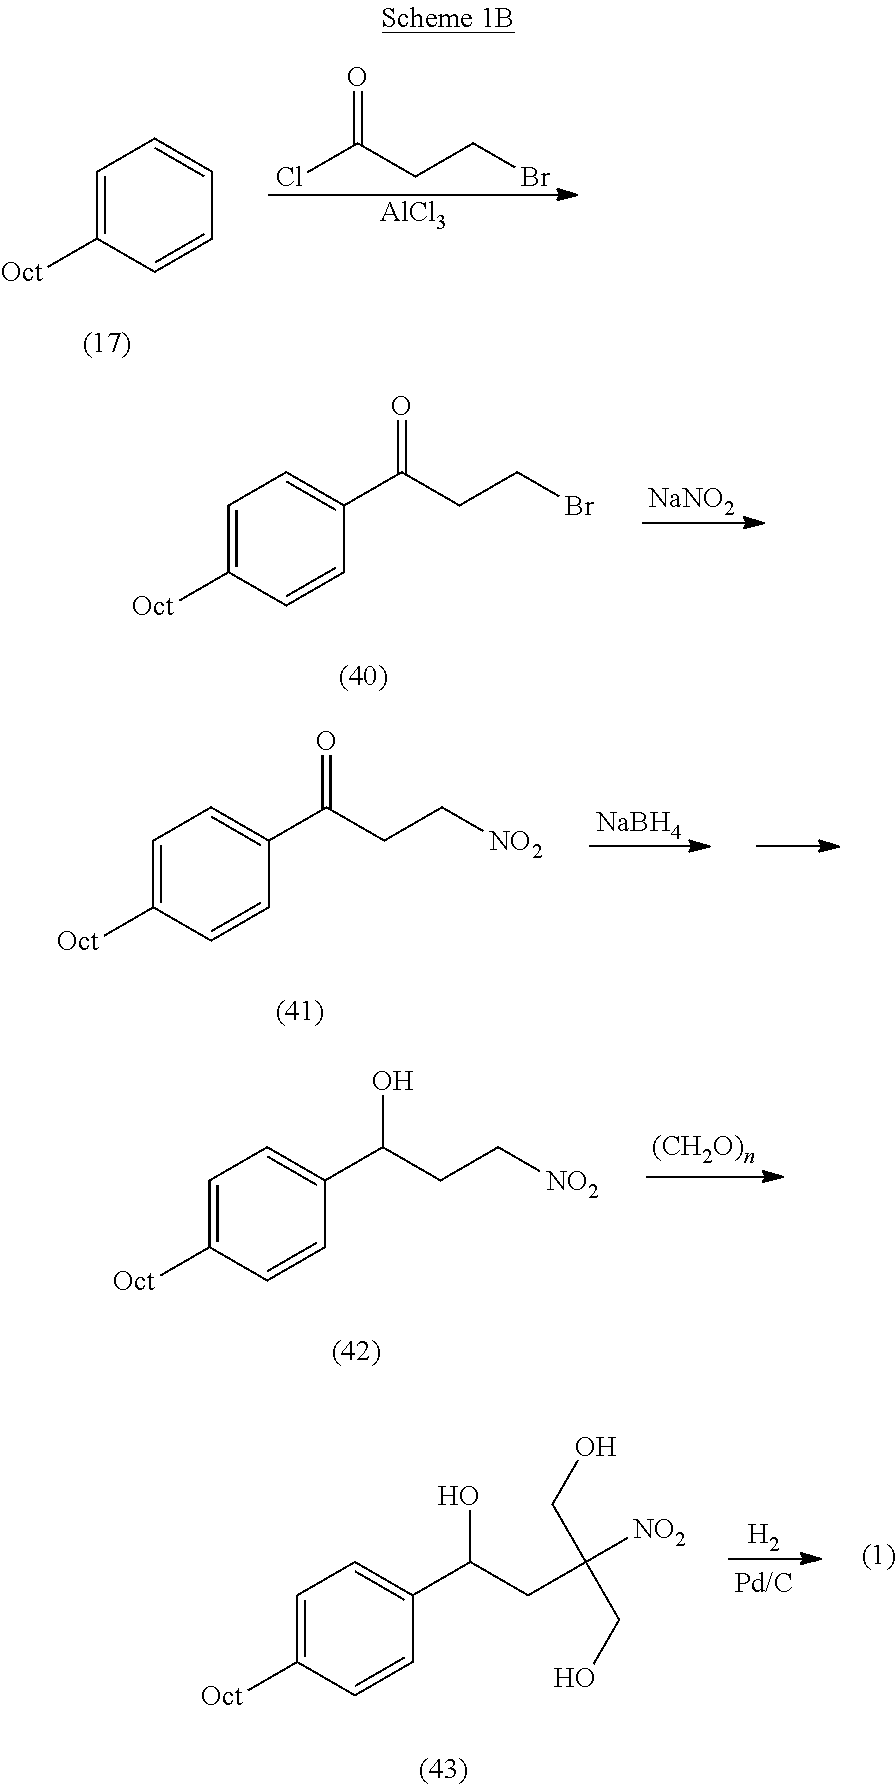 Intermediate compounds and process for the preparation of fingolimod